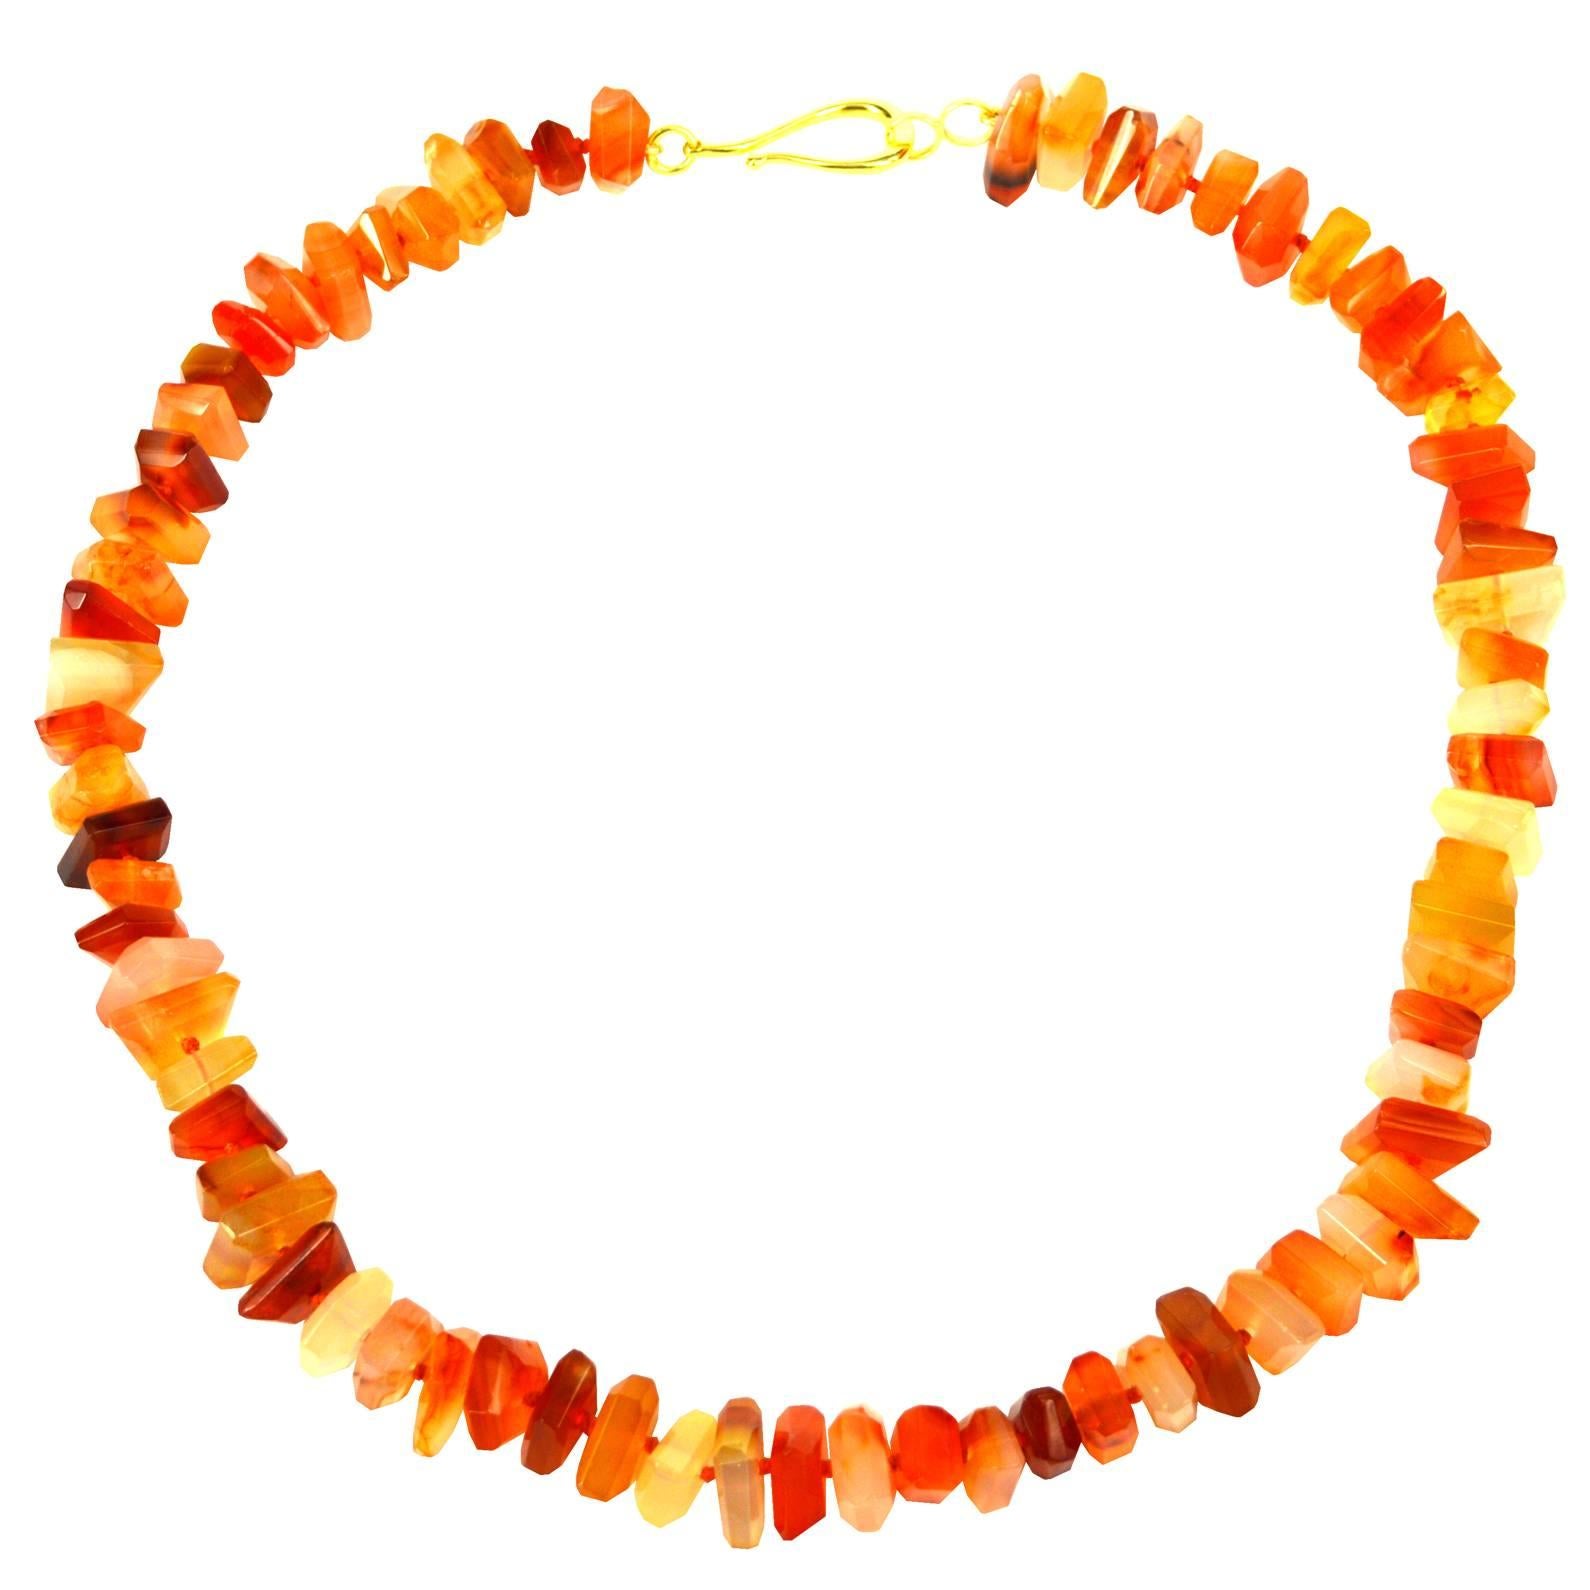 Carnelian Faceted Slice rondel with a 40mm Gold plate Sterling Silver hook Clasp, hand knotted for strength and durability.

Finished necklace measures 55cm.

Custom modification available on request




